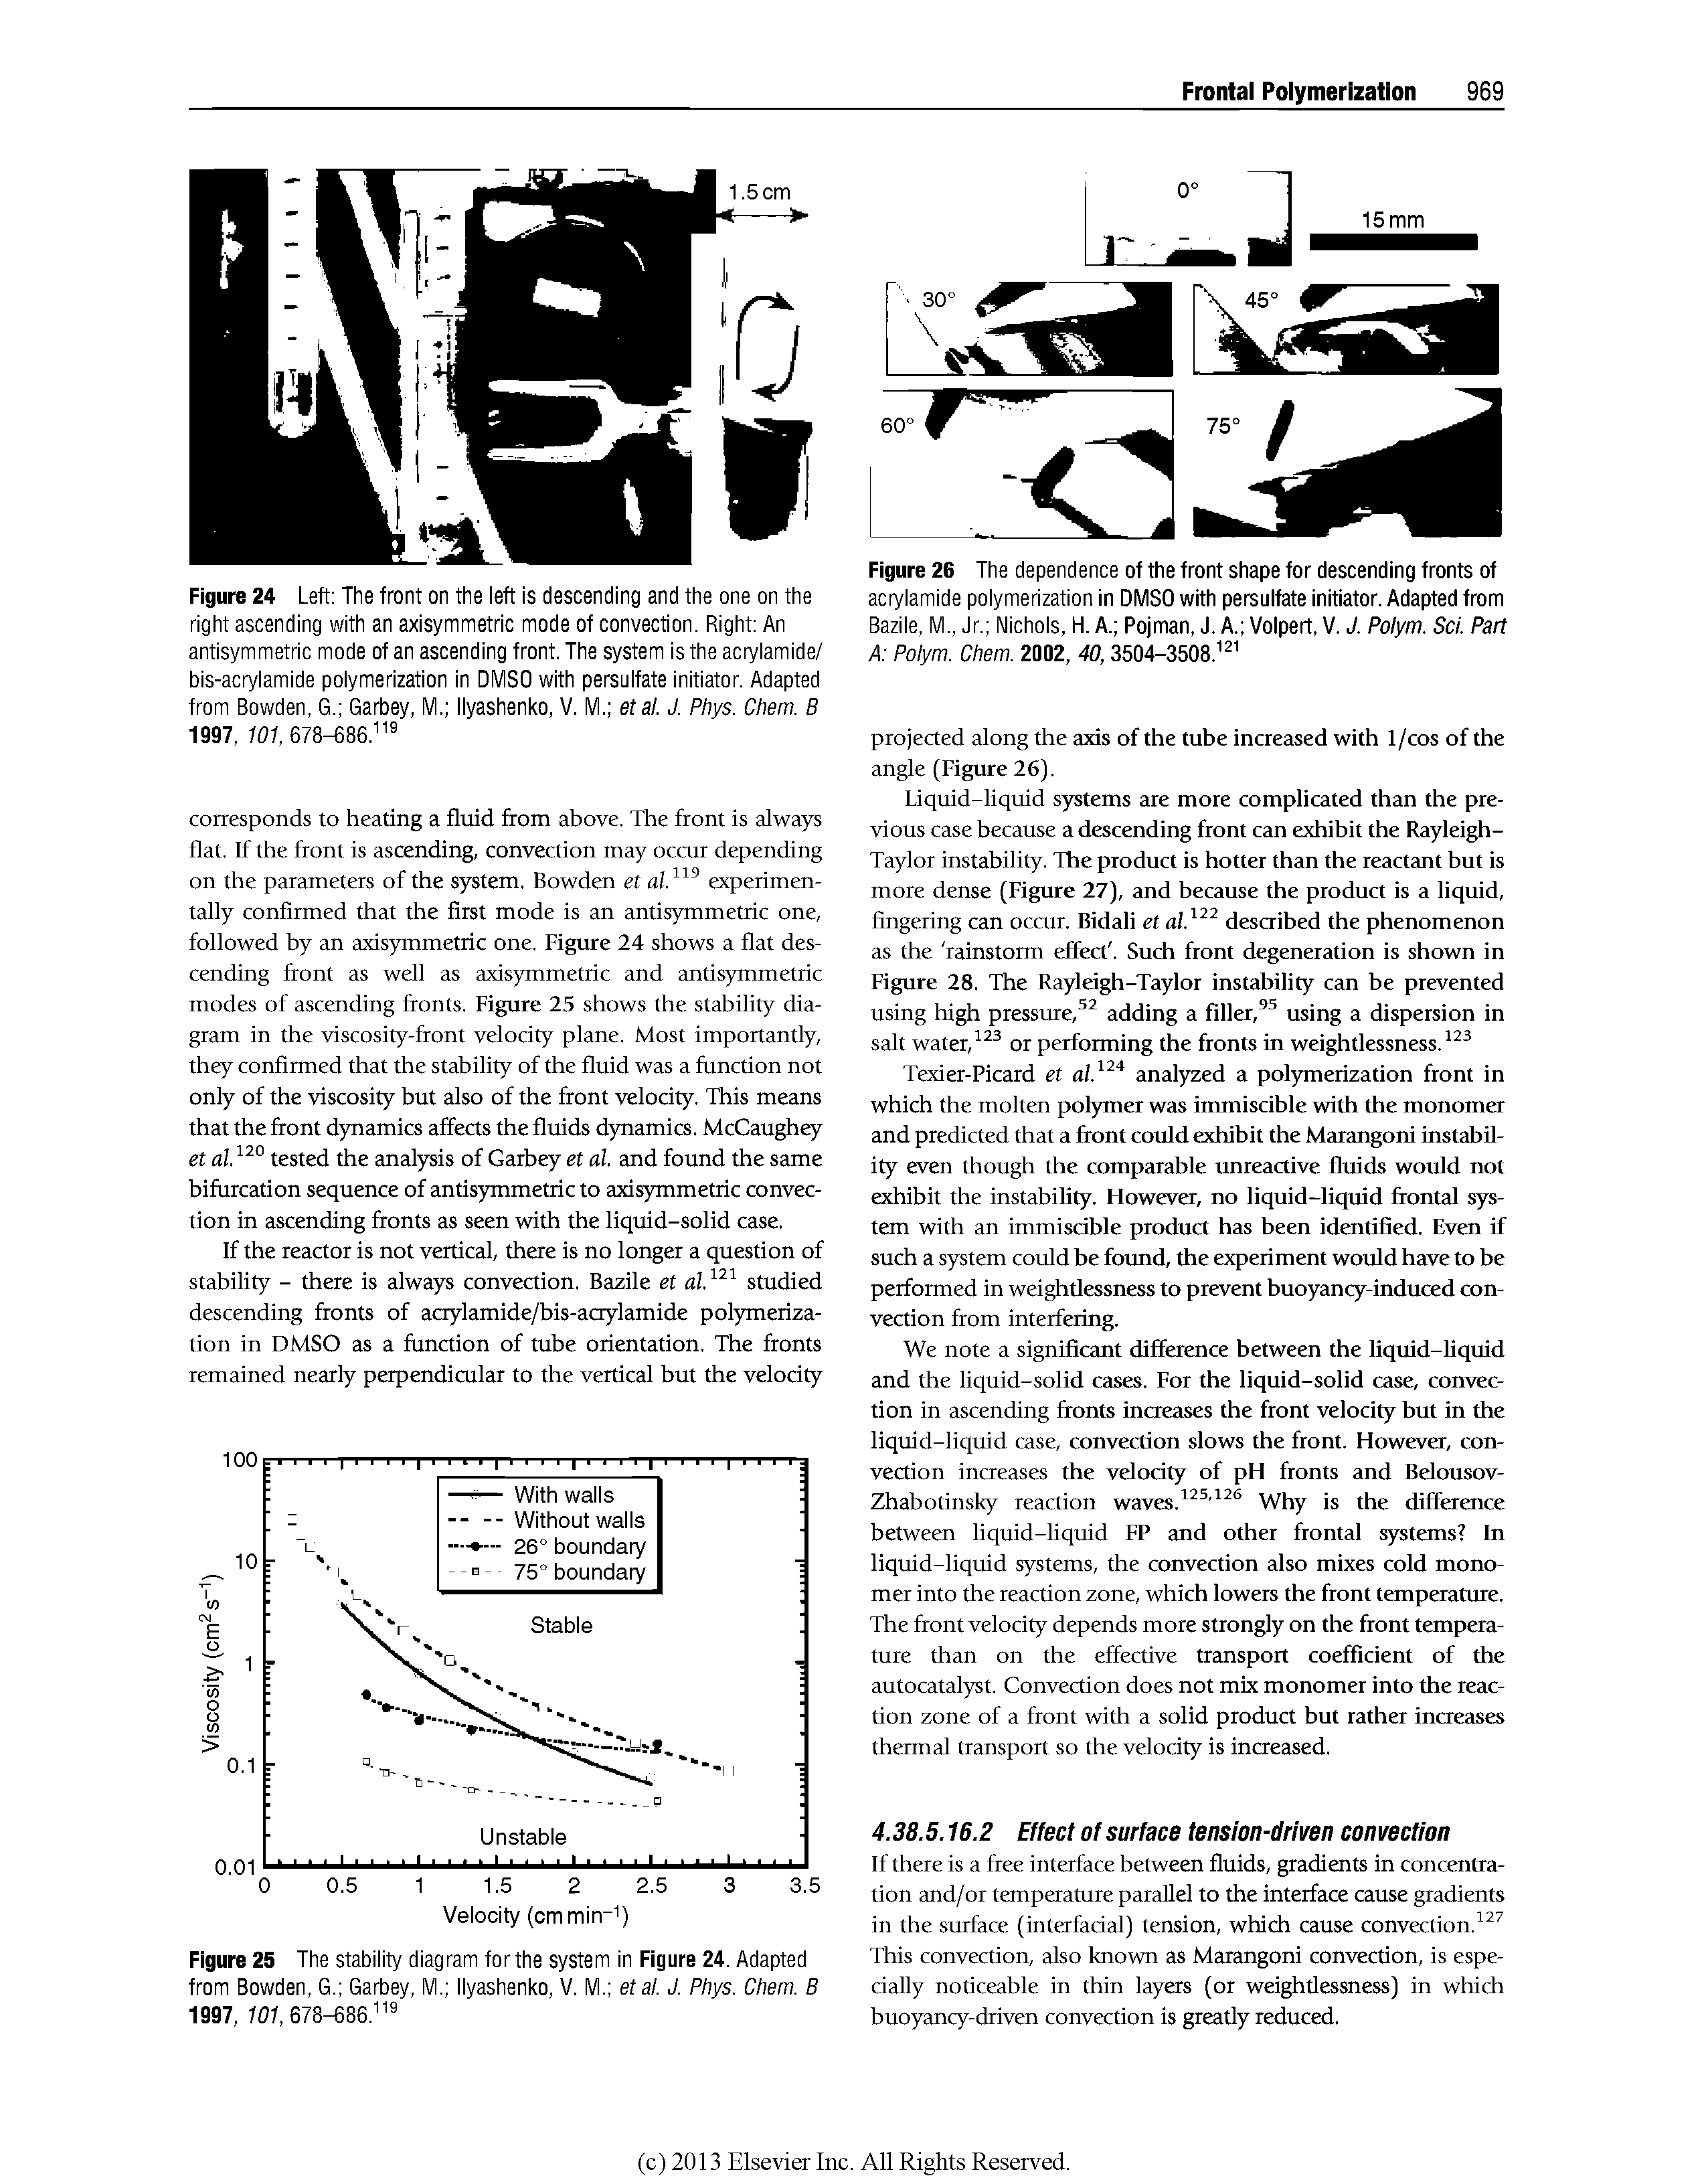 Figure 26 The dependence of the front shape for descending fronts of acrylamide polymerization in DMSO with persuifate initiator. Adapted from Bazile, M., Jr. Nichols, H. A. Pojman, J. A. Volpert, V. J. Polym. Sci. Part A Polym. Chem. 2002, 40,3504-3508. ...